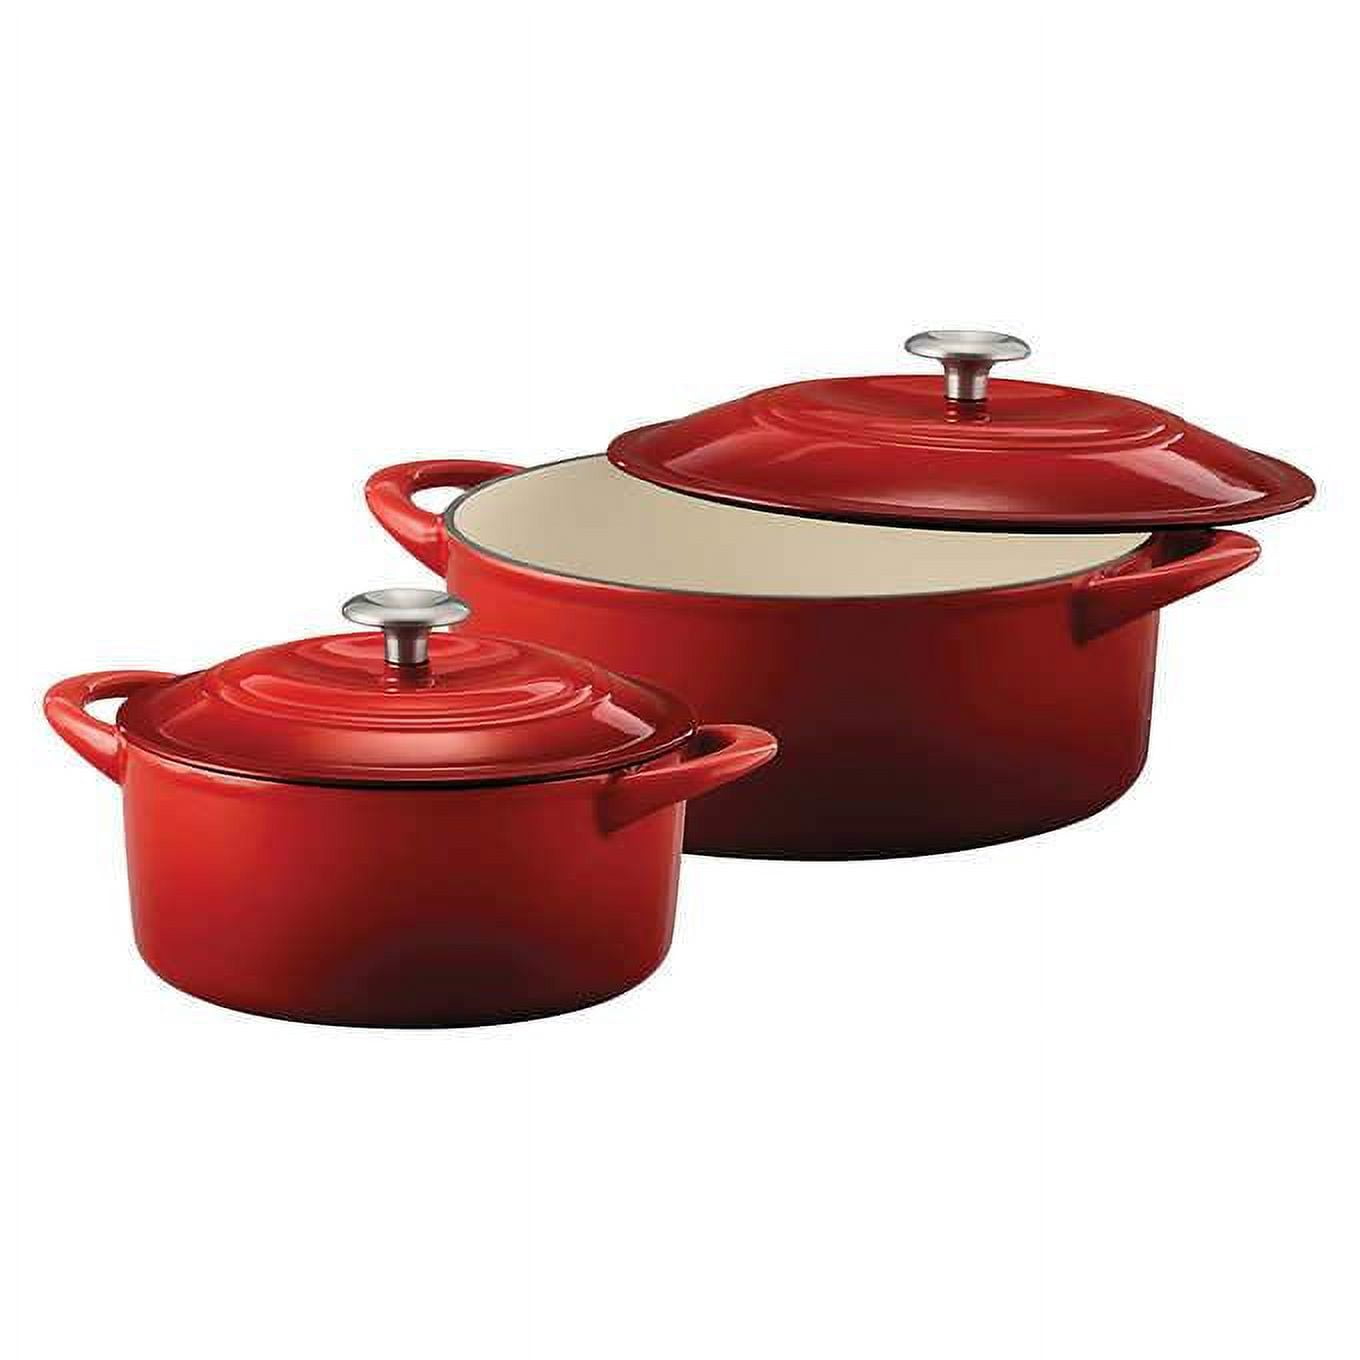 Tramontina Cast Iron Dutch Oven 2-Pack Only $48.99 Shipped on Costco.com